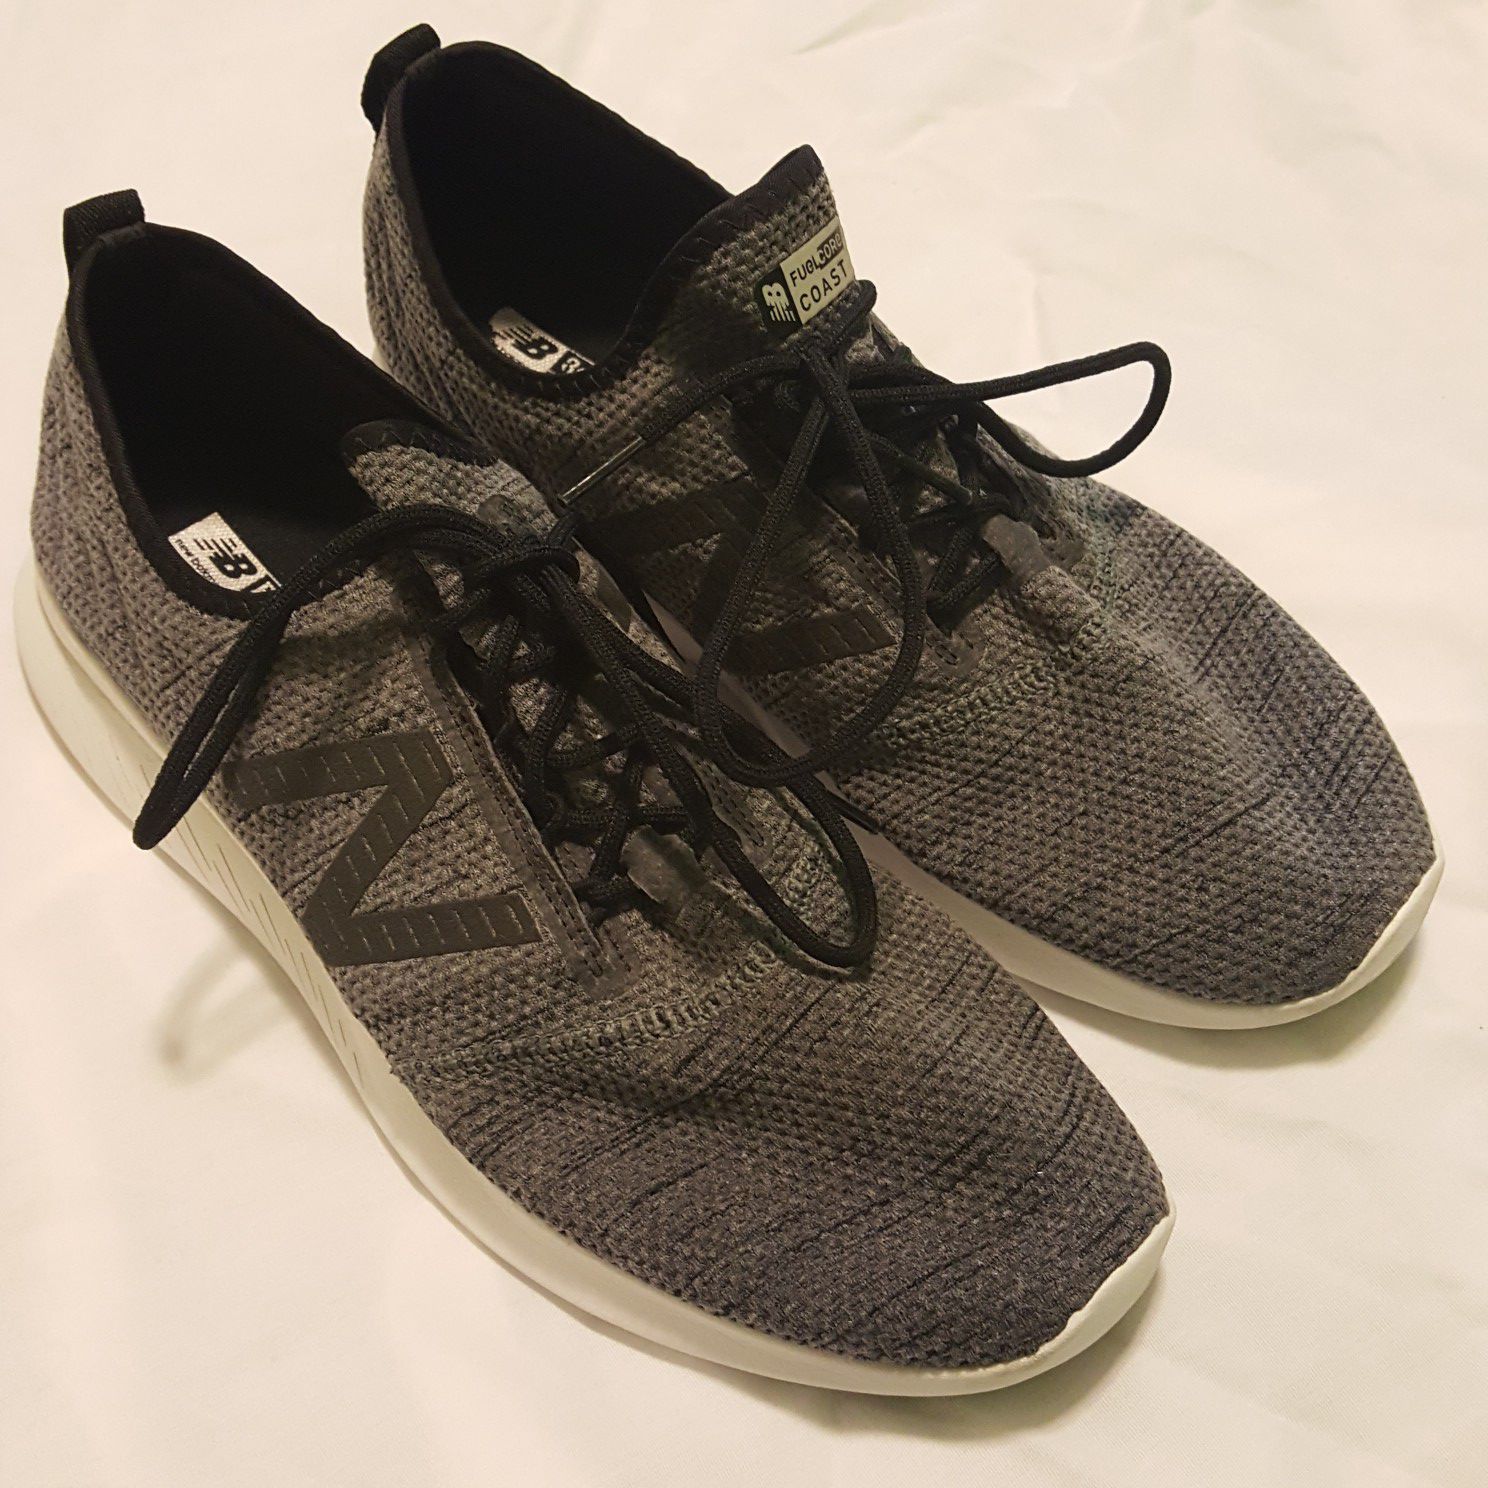 New Balance FuelCore Coast v4 Running Sneakers